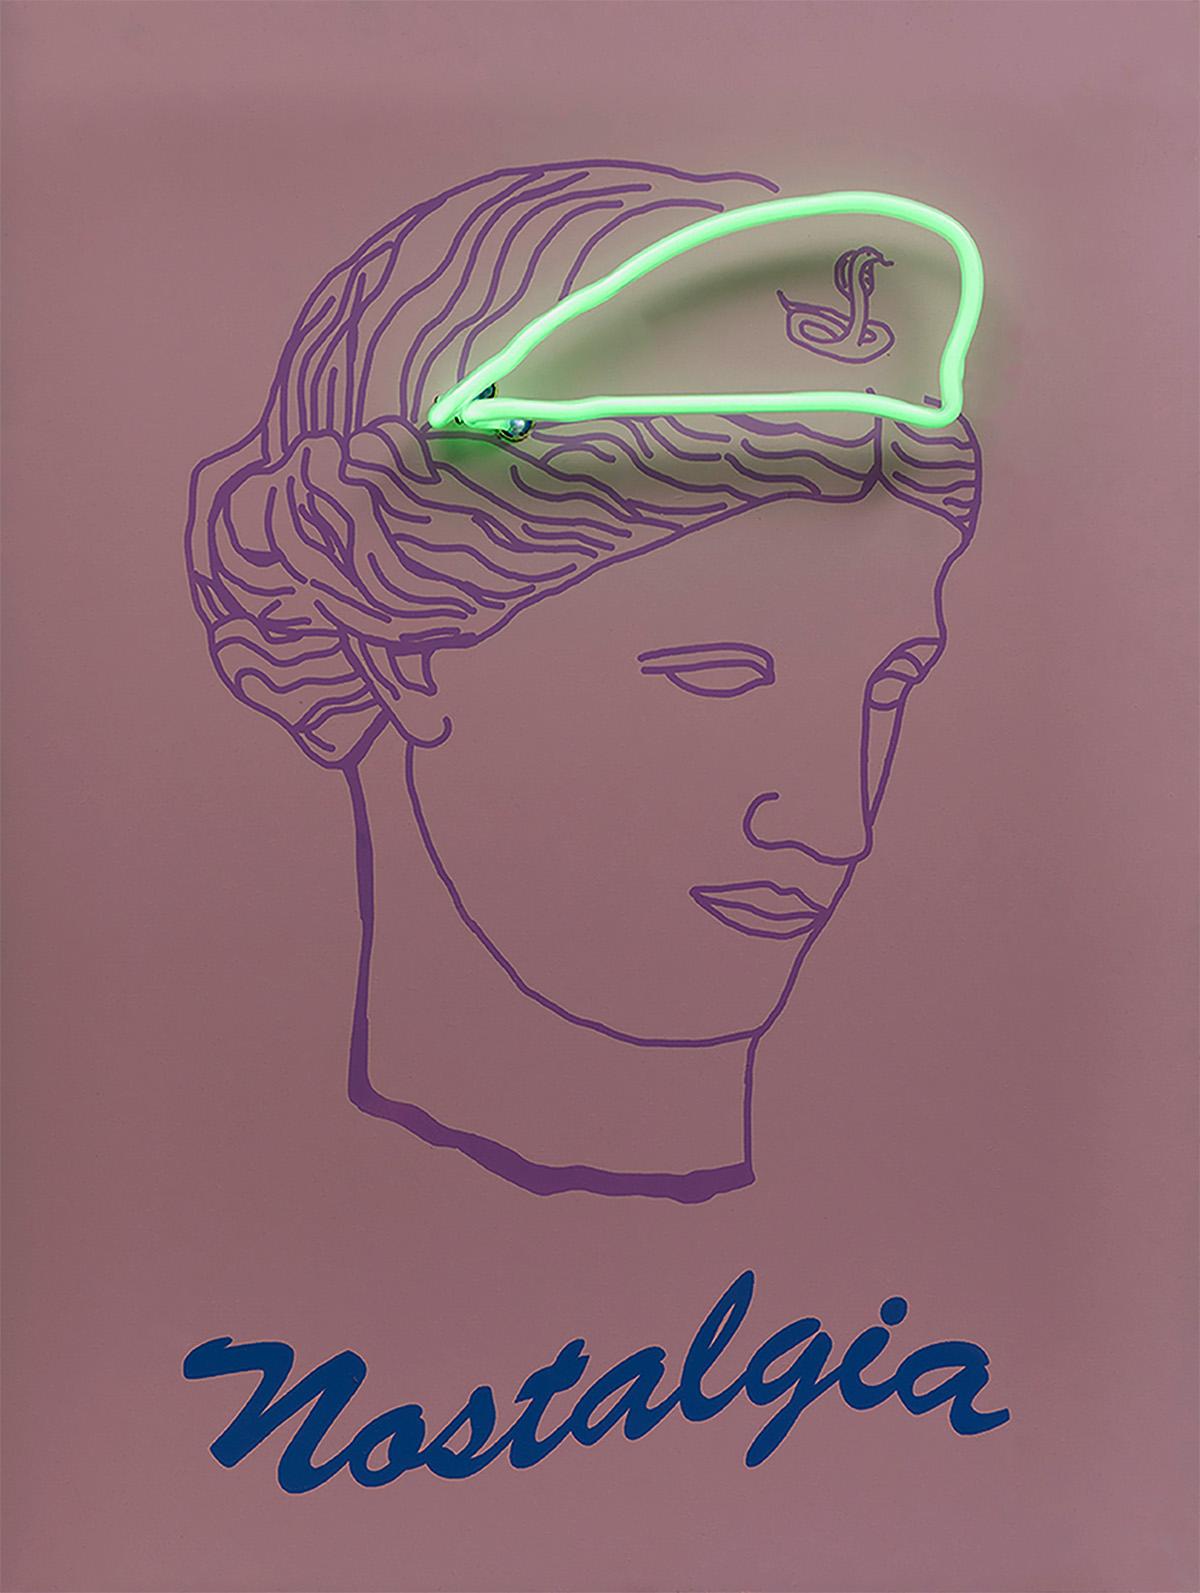 Nostalgia, 2019  Paloma Castello 
From the series Neon Classics
Screen printing with neon lights
Dimensions: 24 H in x 18.1 W x 5.9 D in. 
Edition 2/10

In her work She likes to bring life to objects or icons from the past, intervening in them a